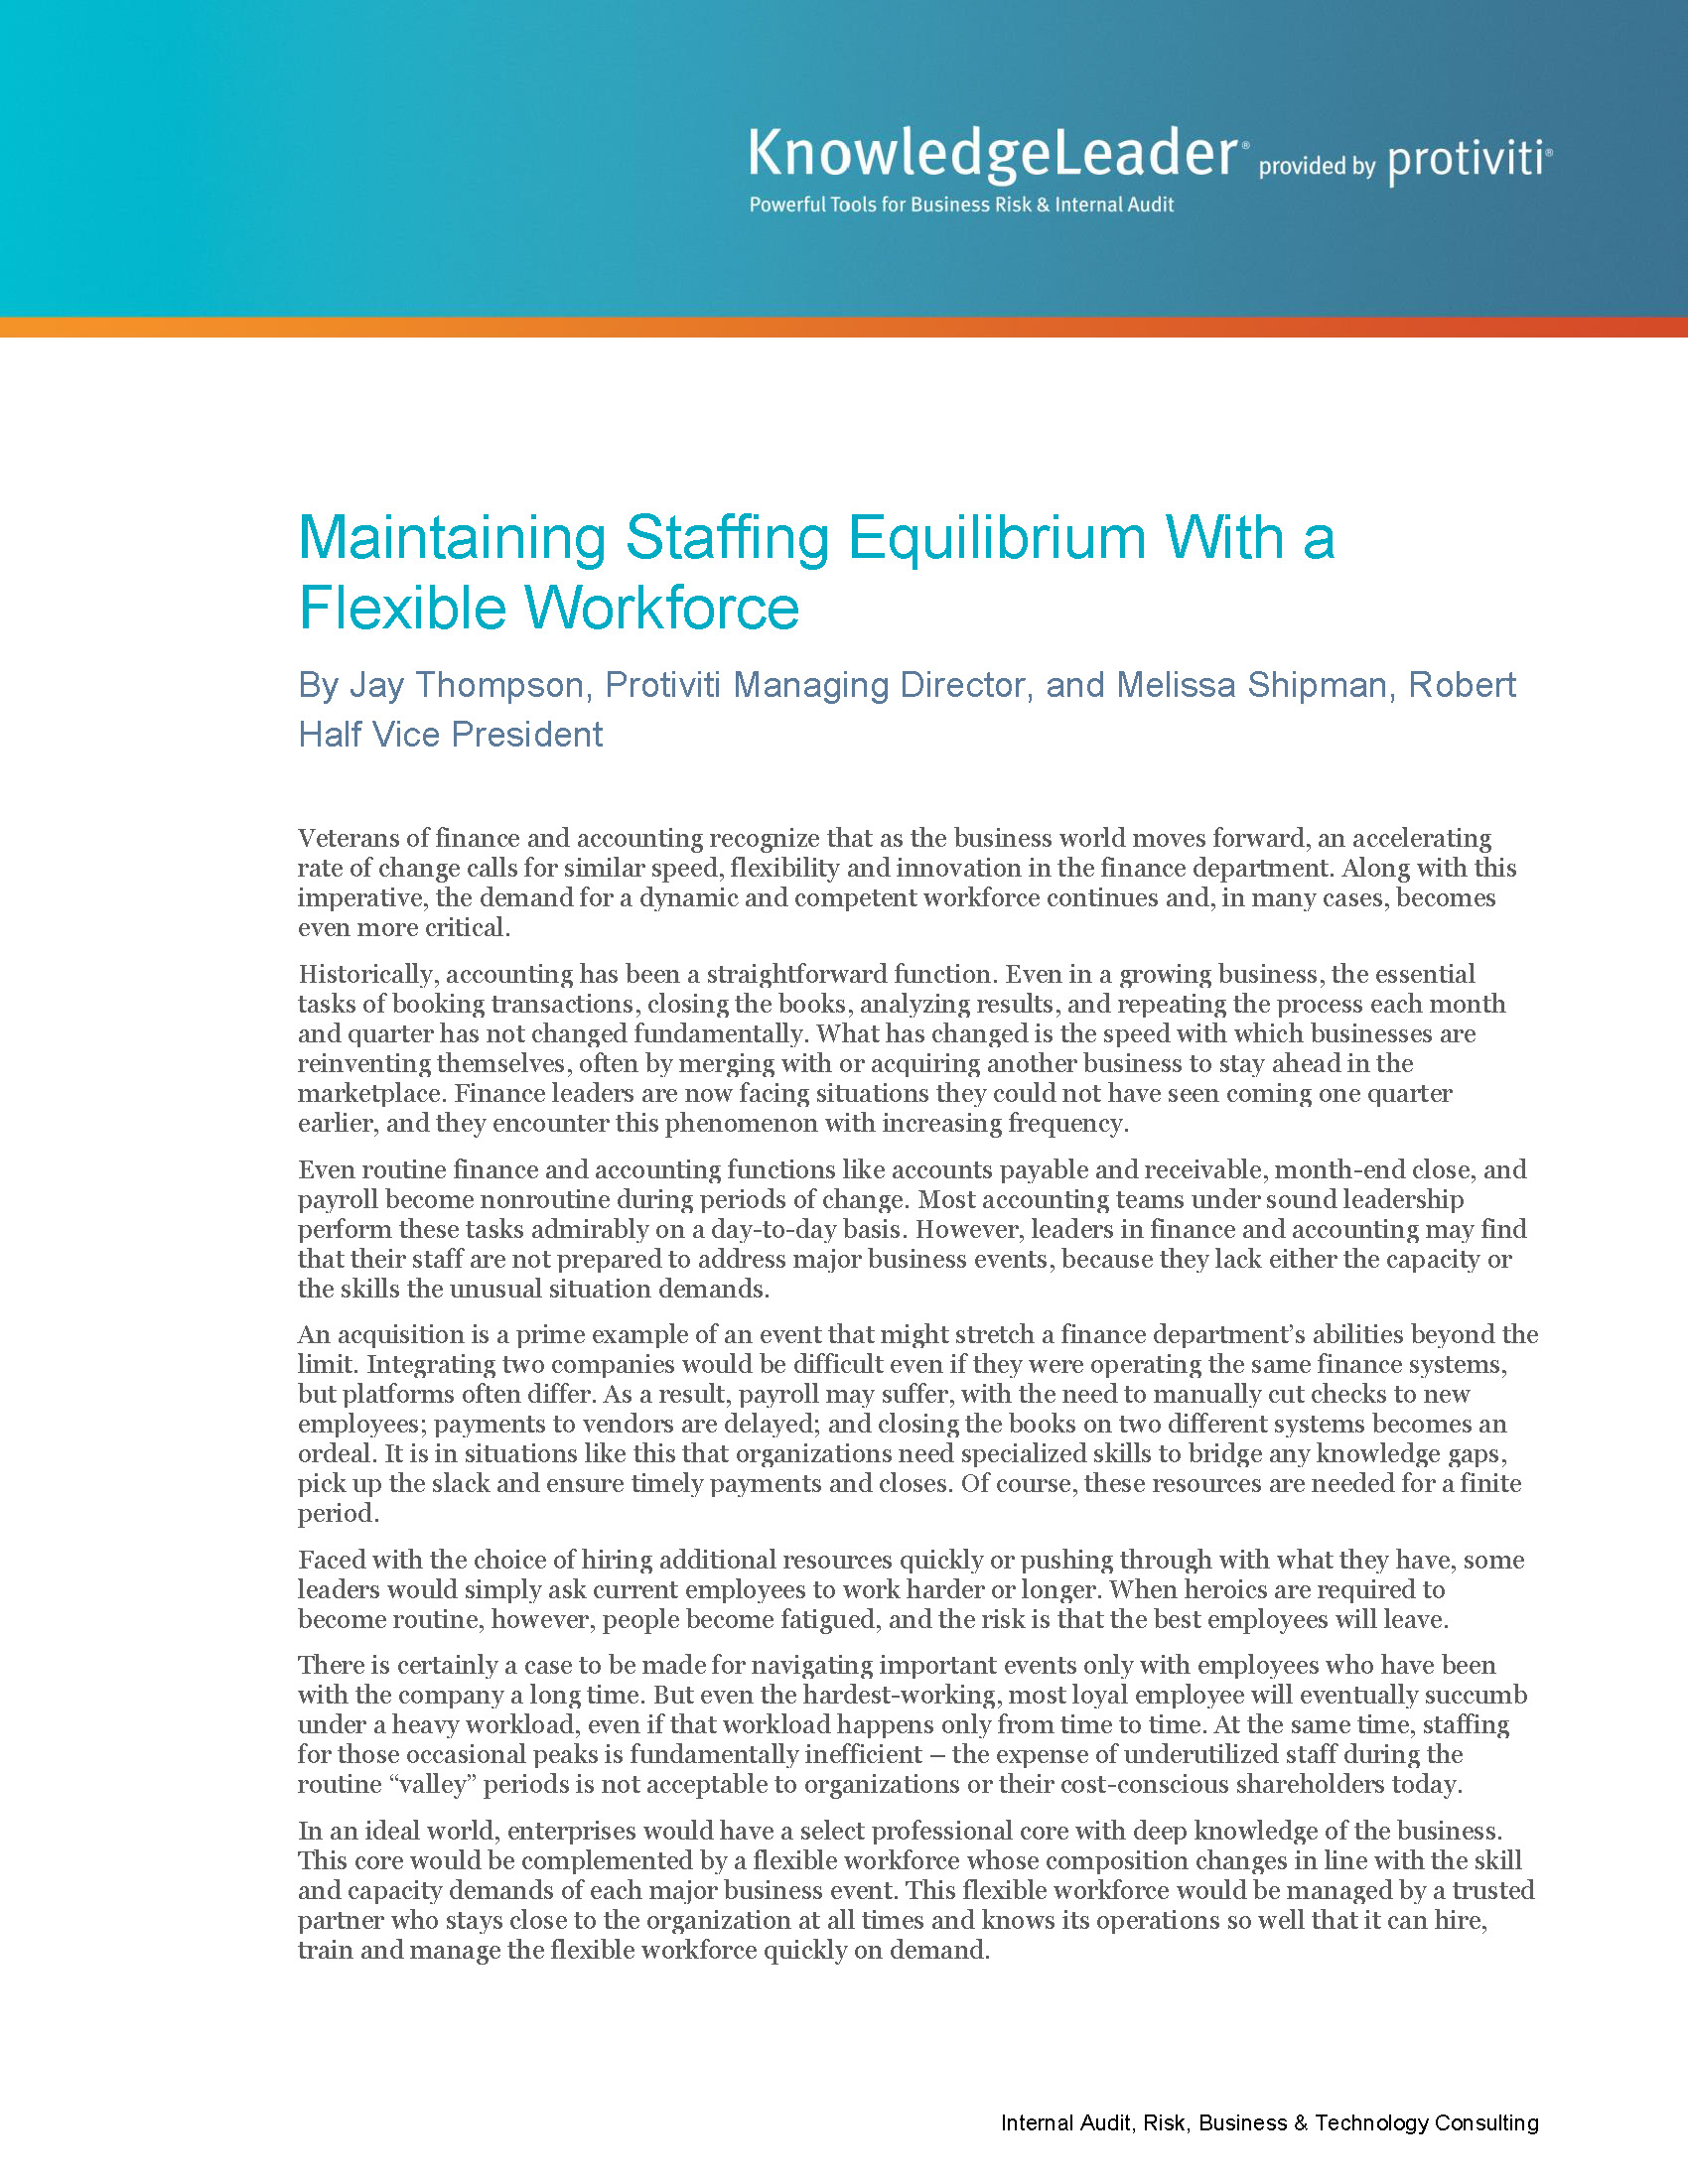 Screenshot of the first page of Maintaining Staffing Equilibrium With a Flexible Workforce